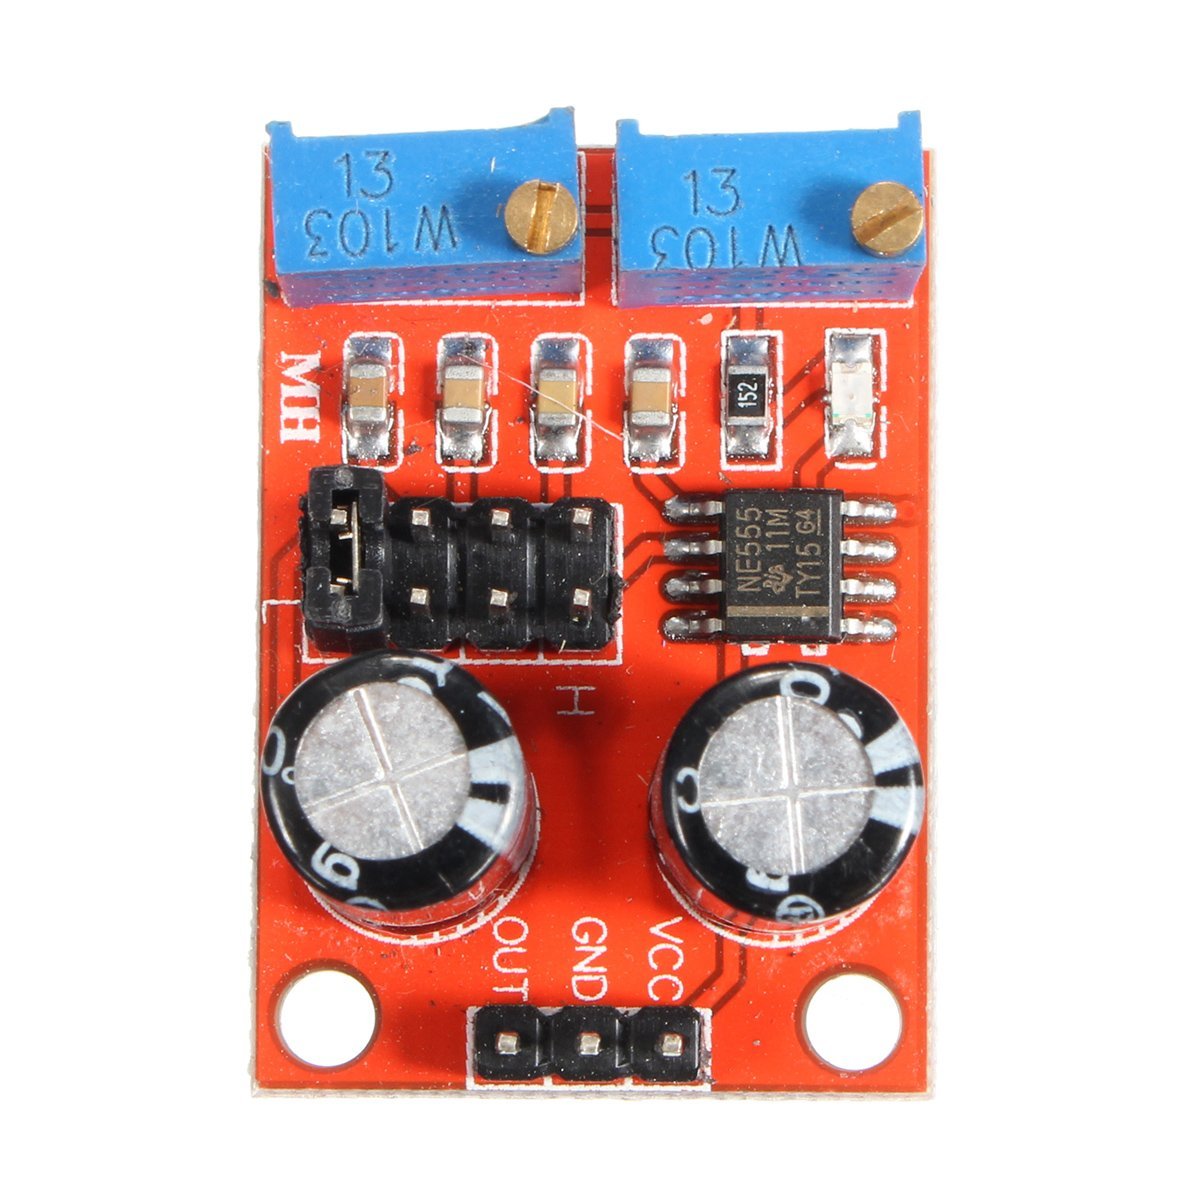 NE555 Pulse Module Frequency Duty Cycle Adjustable Square Signal Generator-ac 